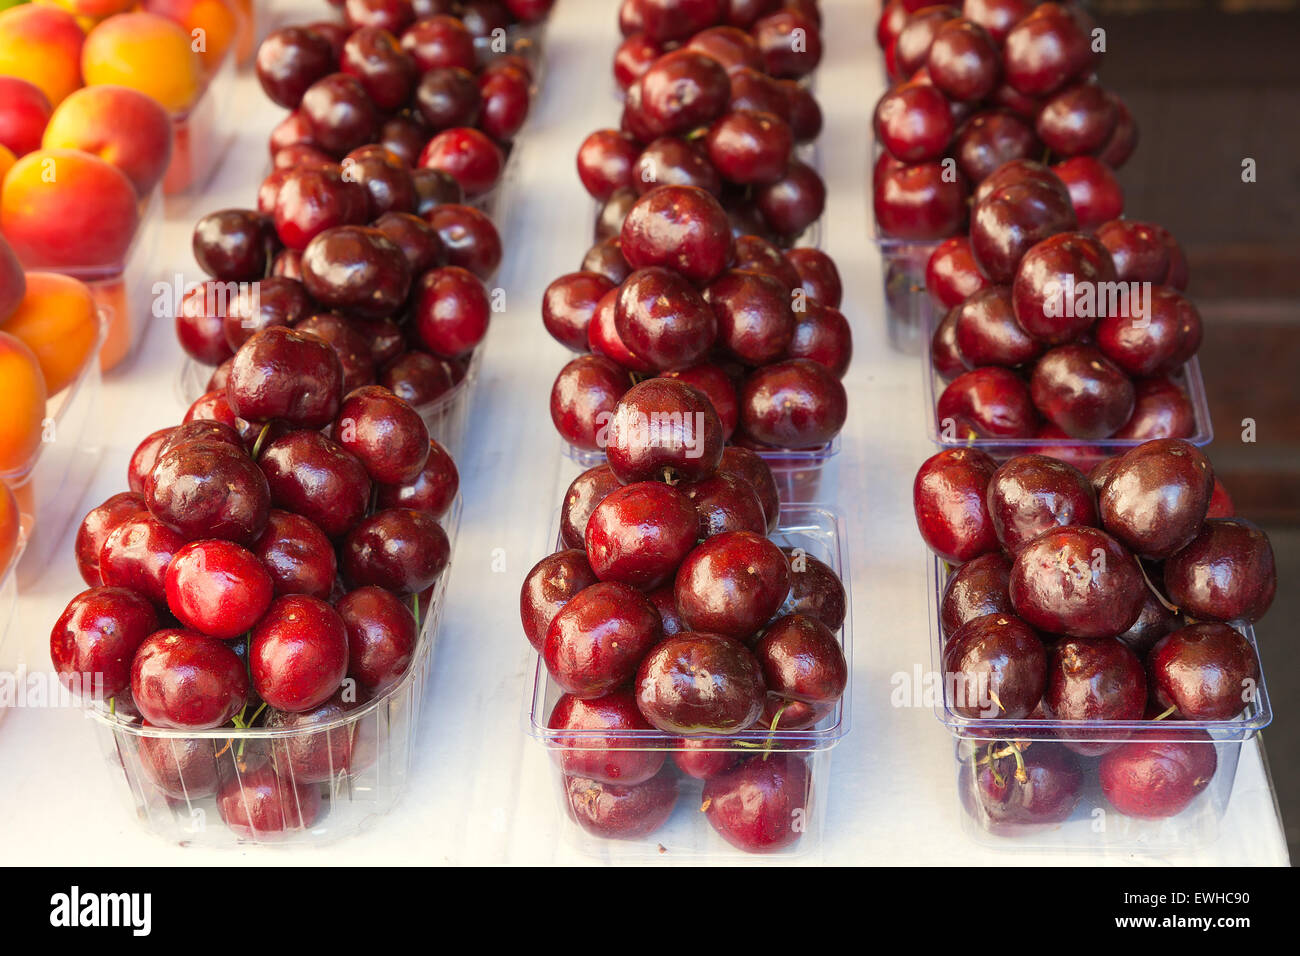 Colorful display of ripe cherries at a food market. Stock Photo